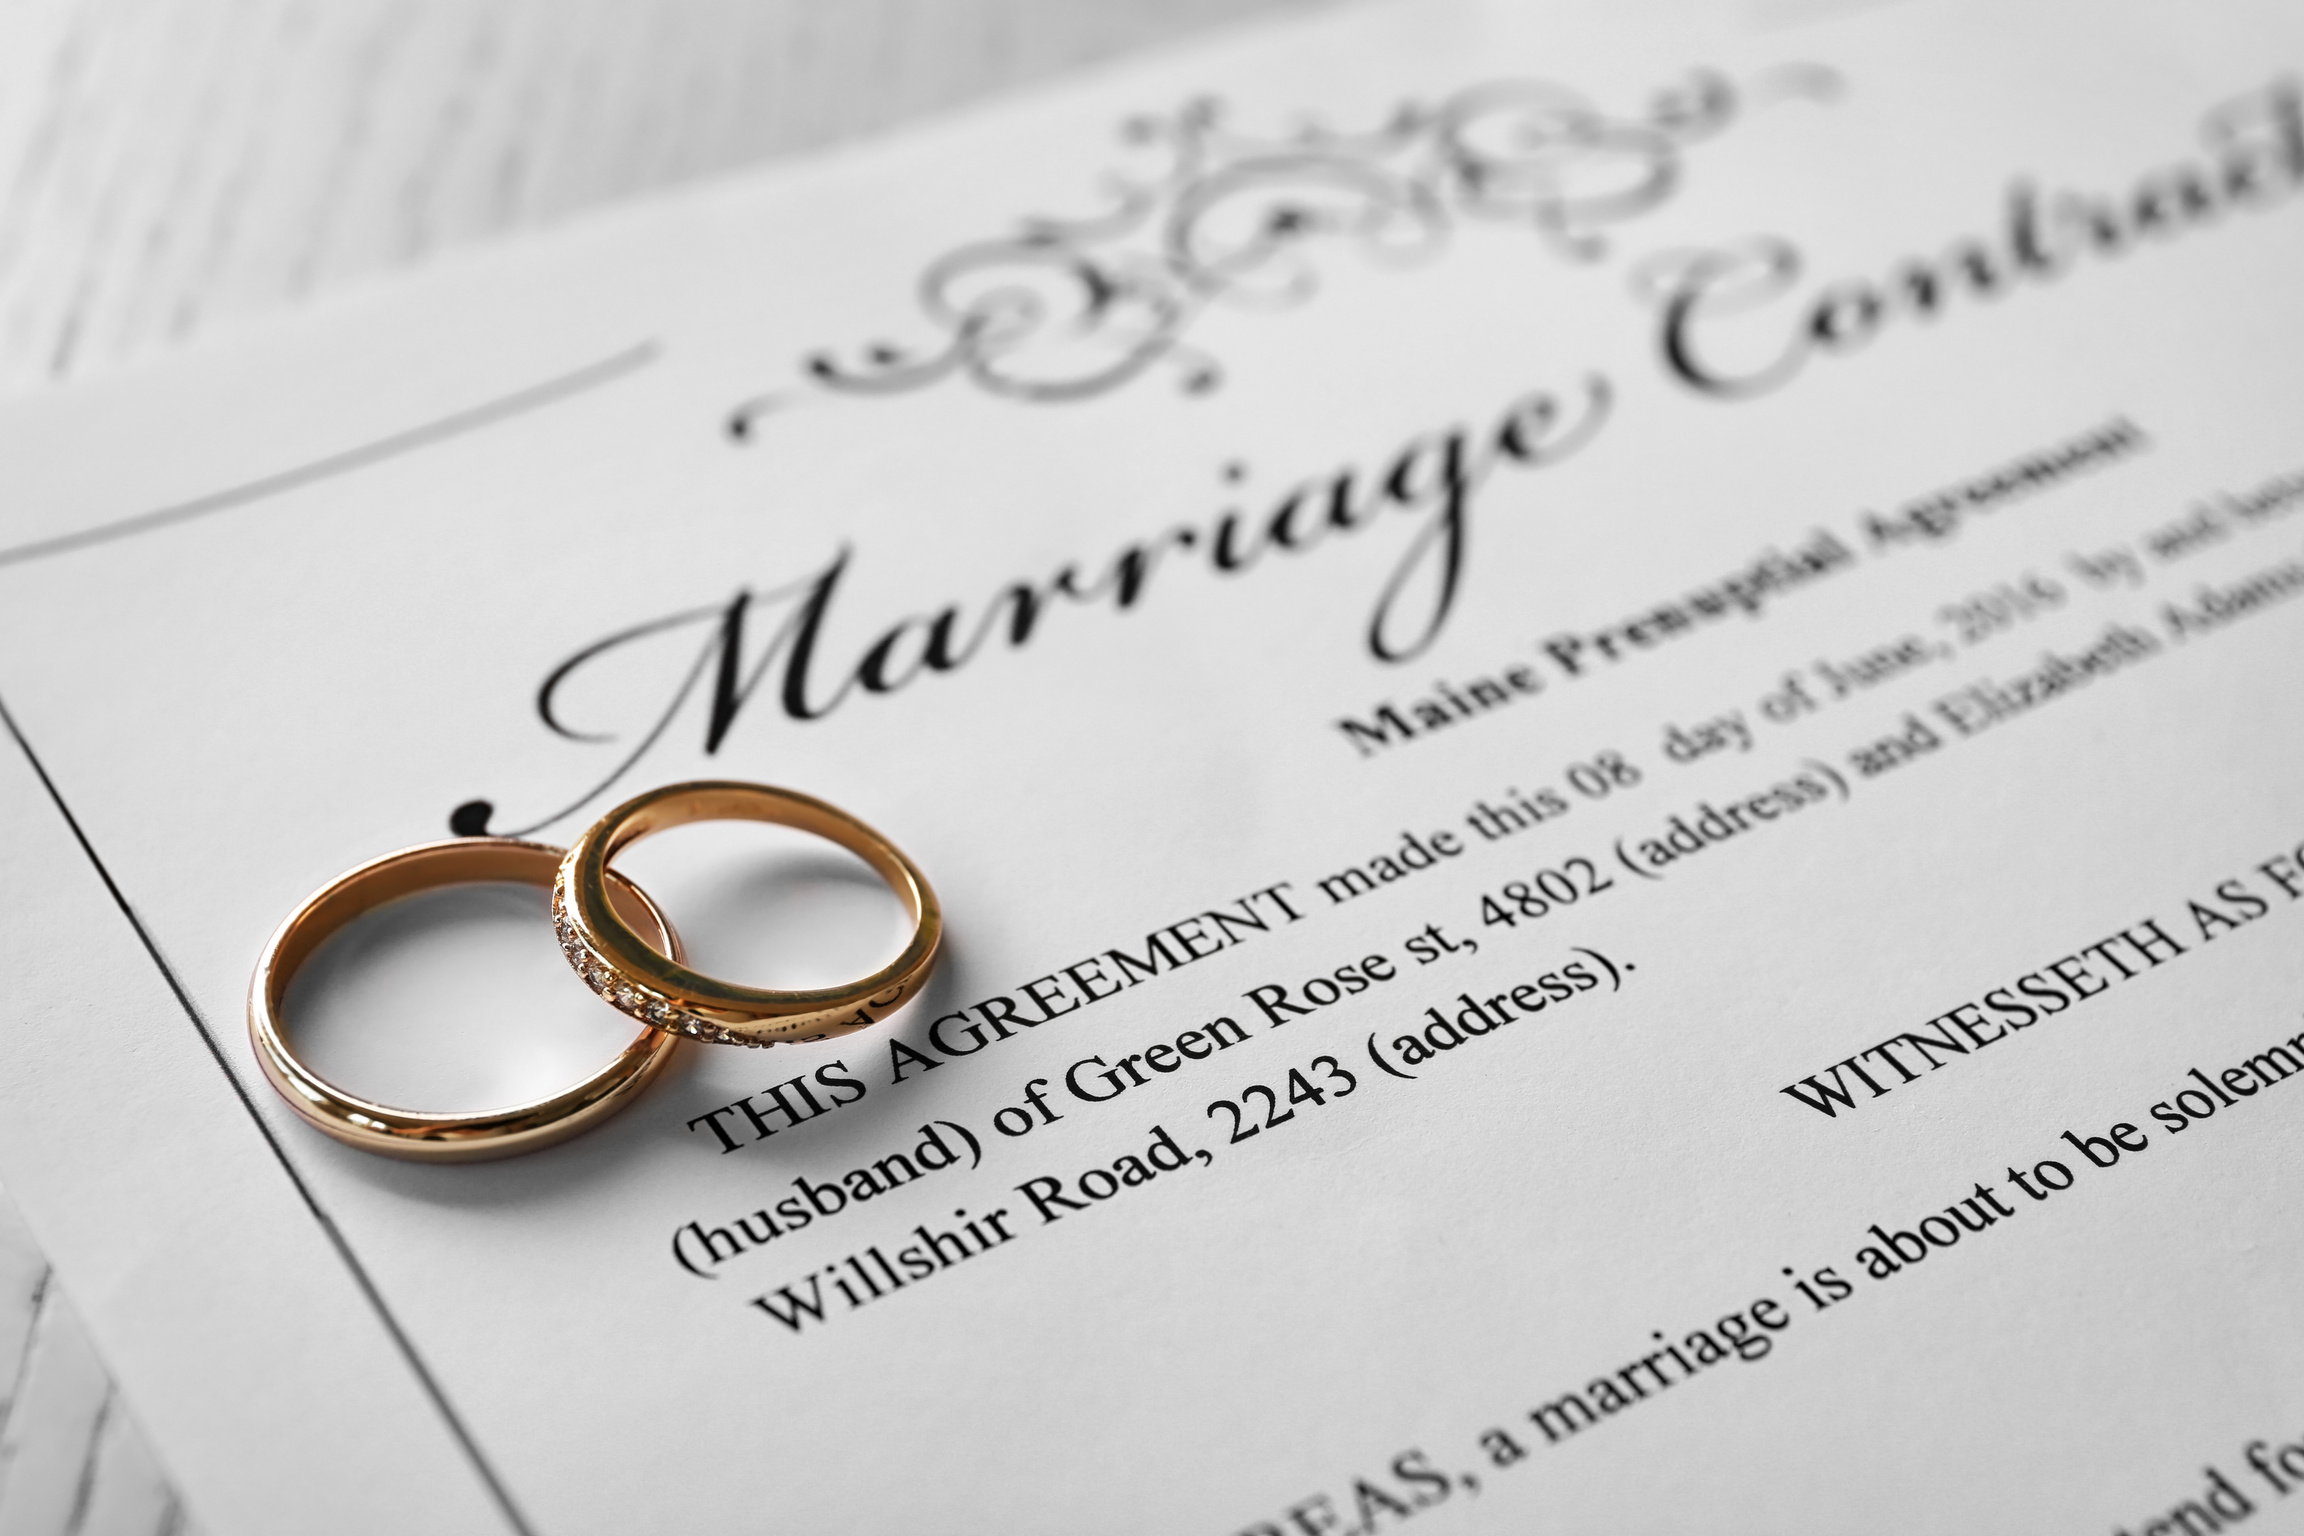 Golden Wedding Rings on Marriage Contract